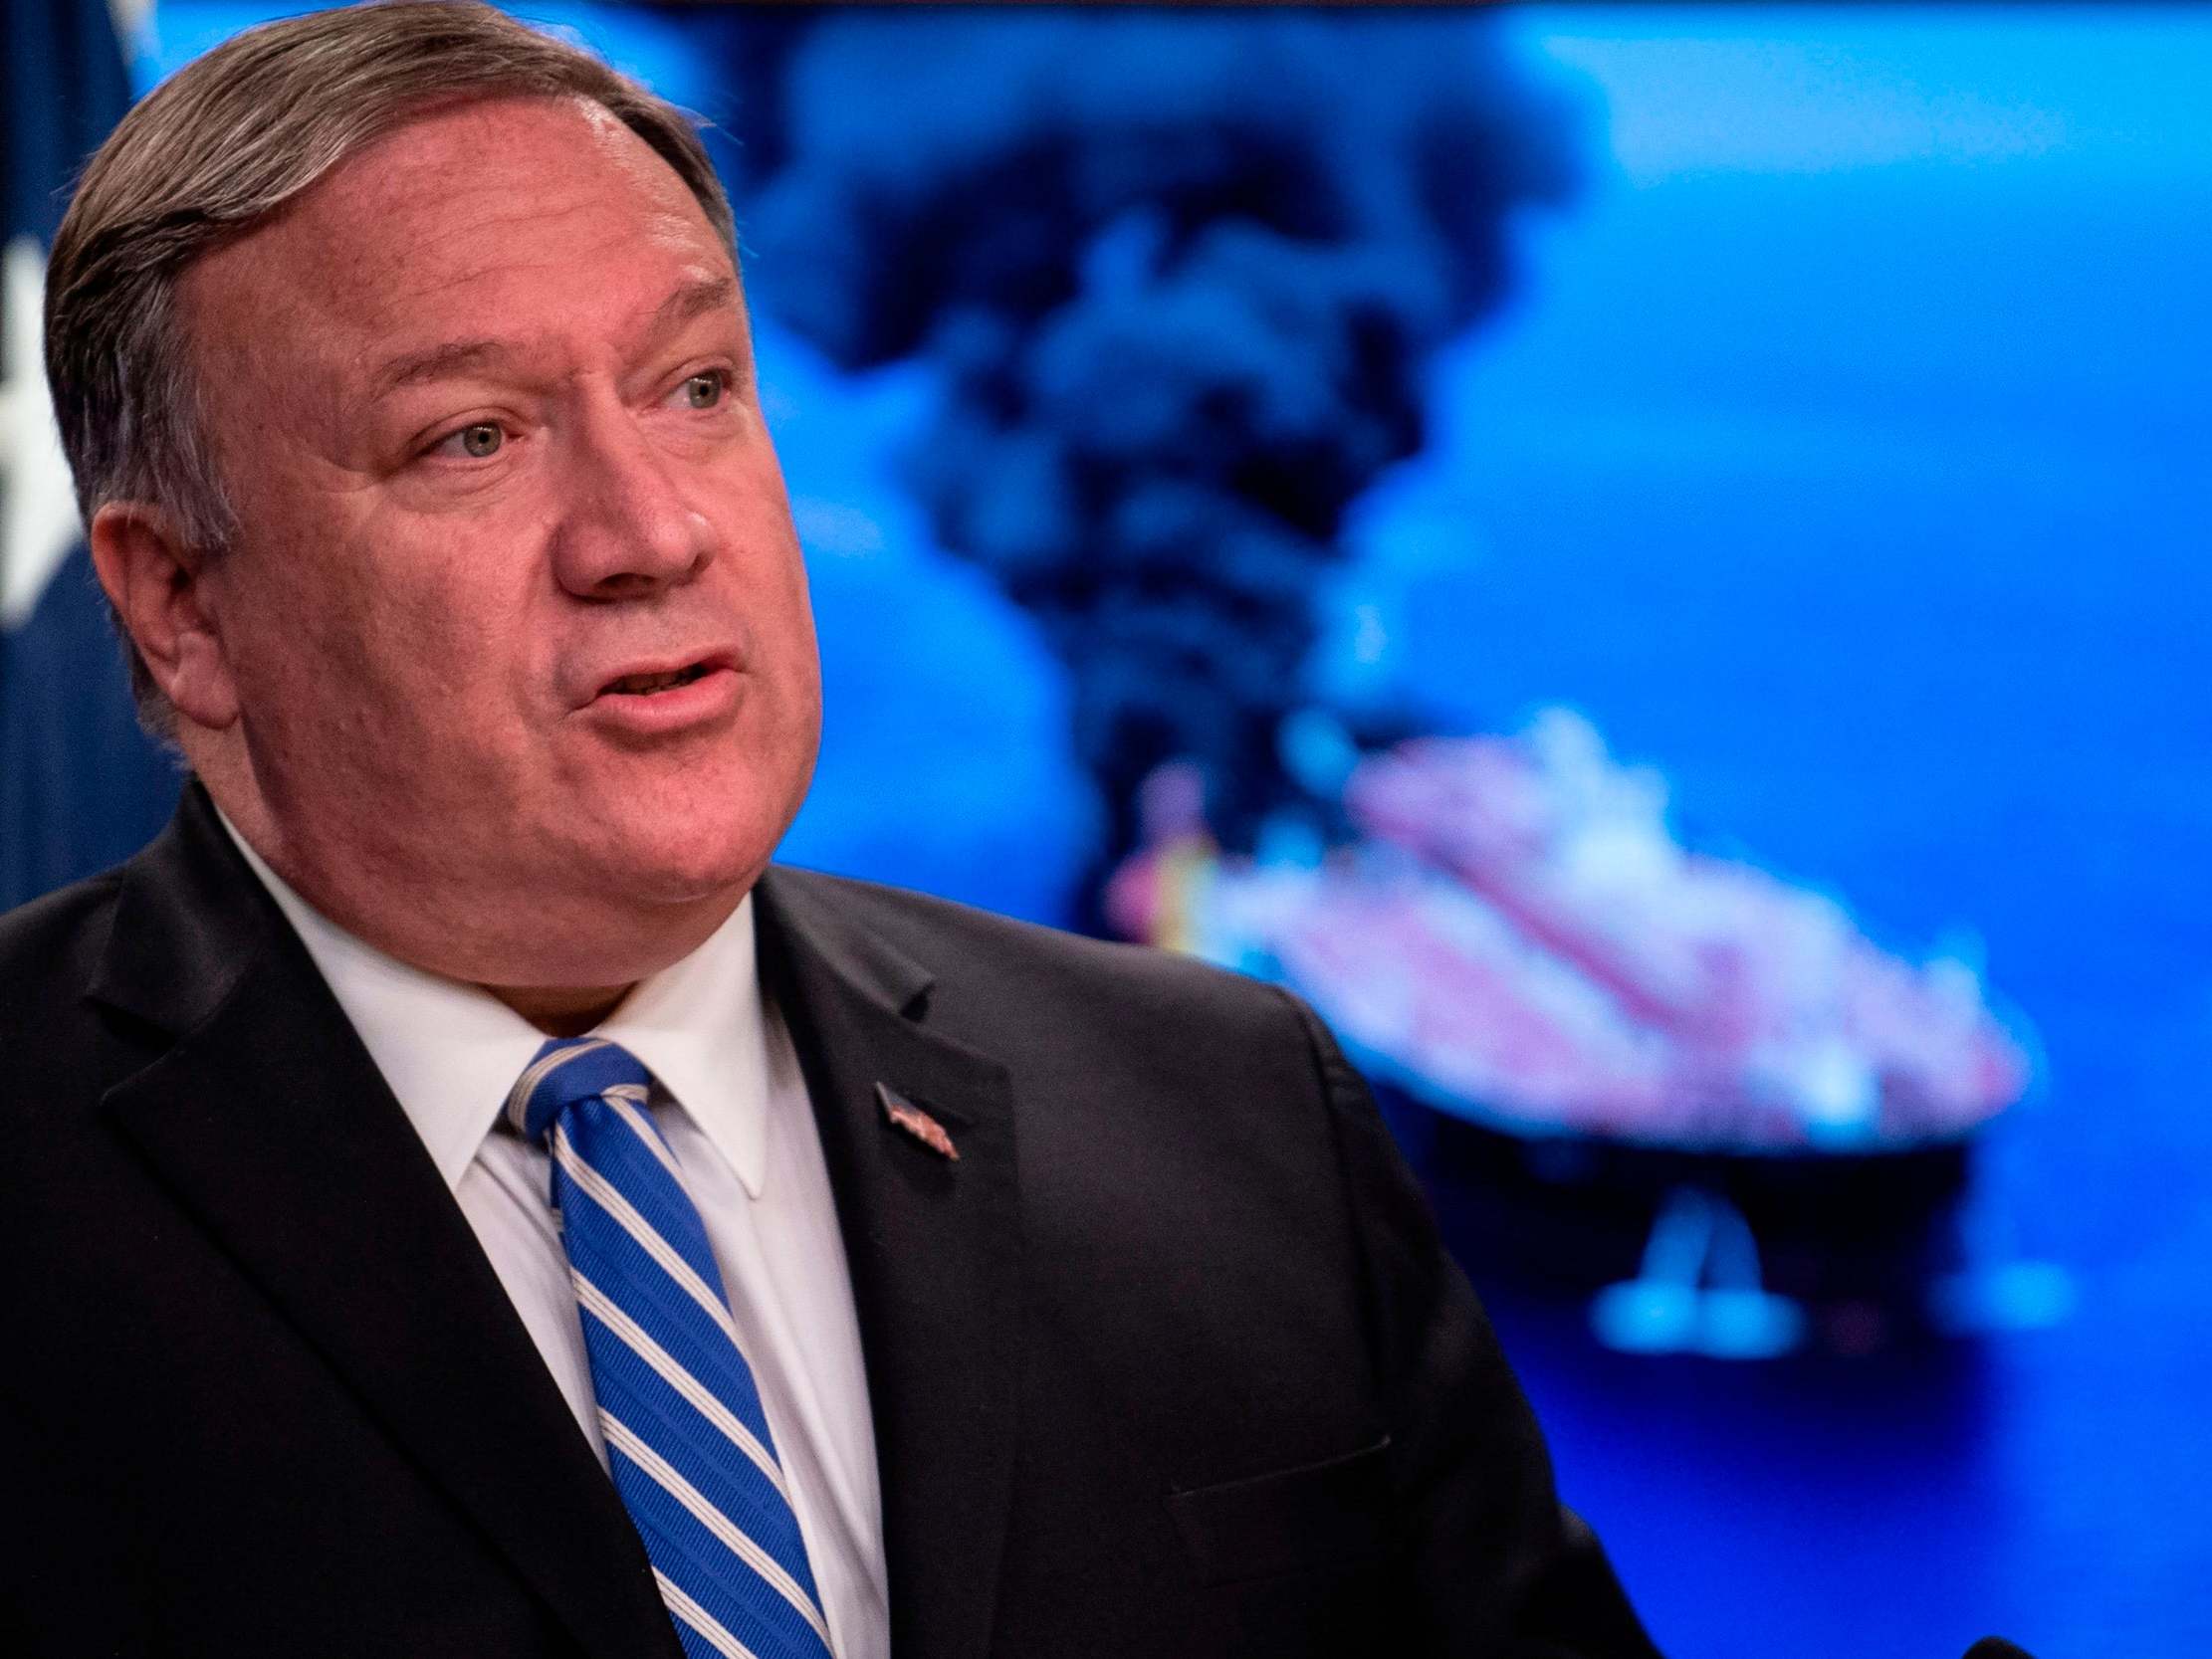 Mike Pompeo says US 'fundamentally do not seek a war with Iran' - even as tensions escalate